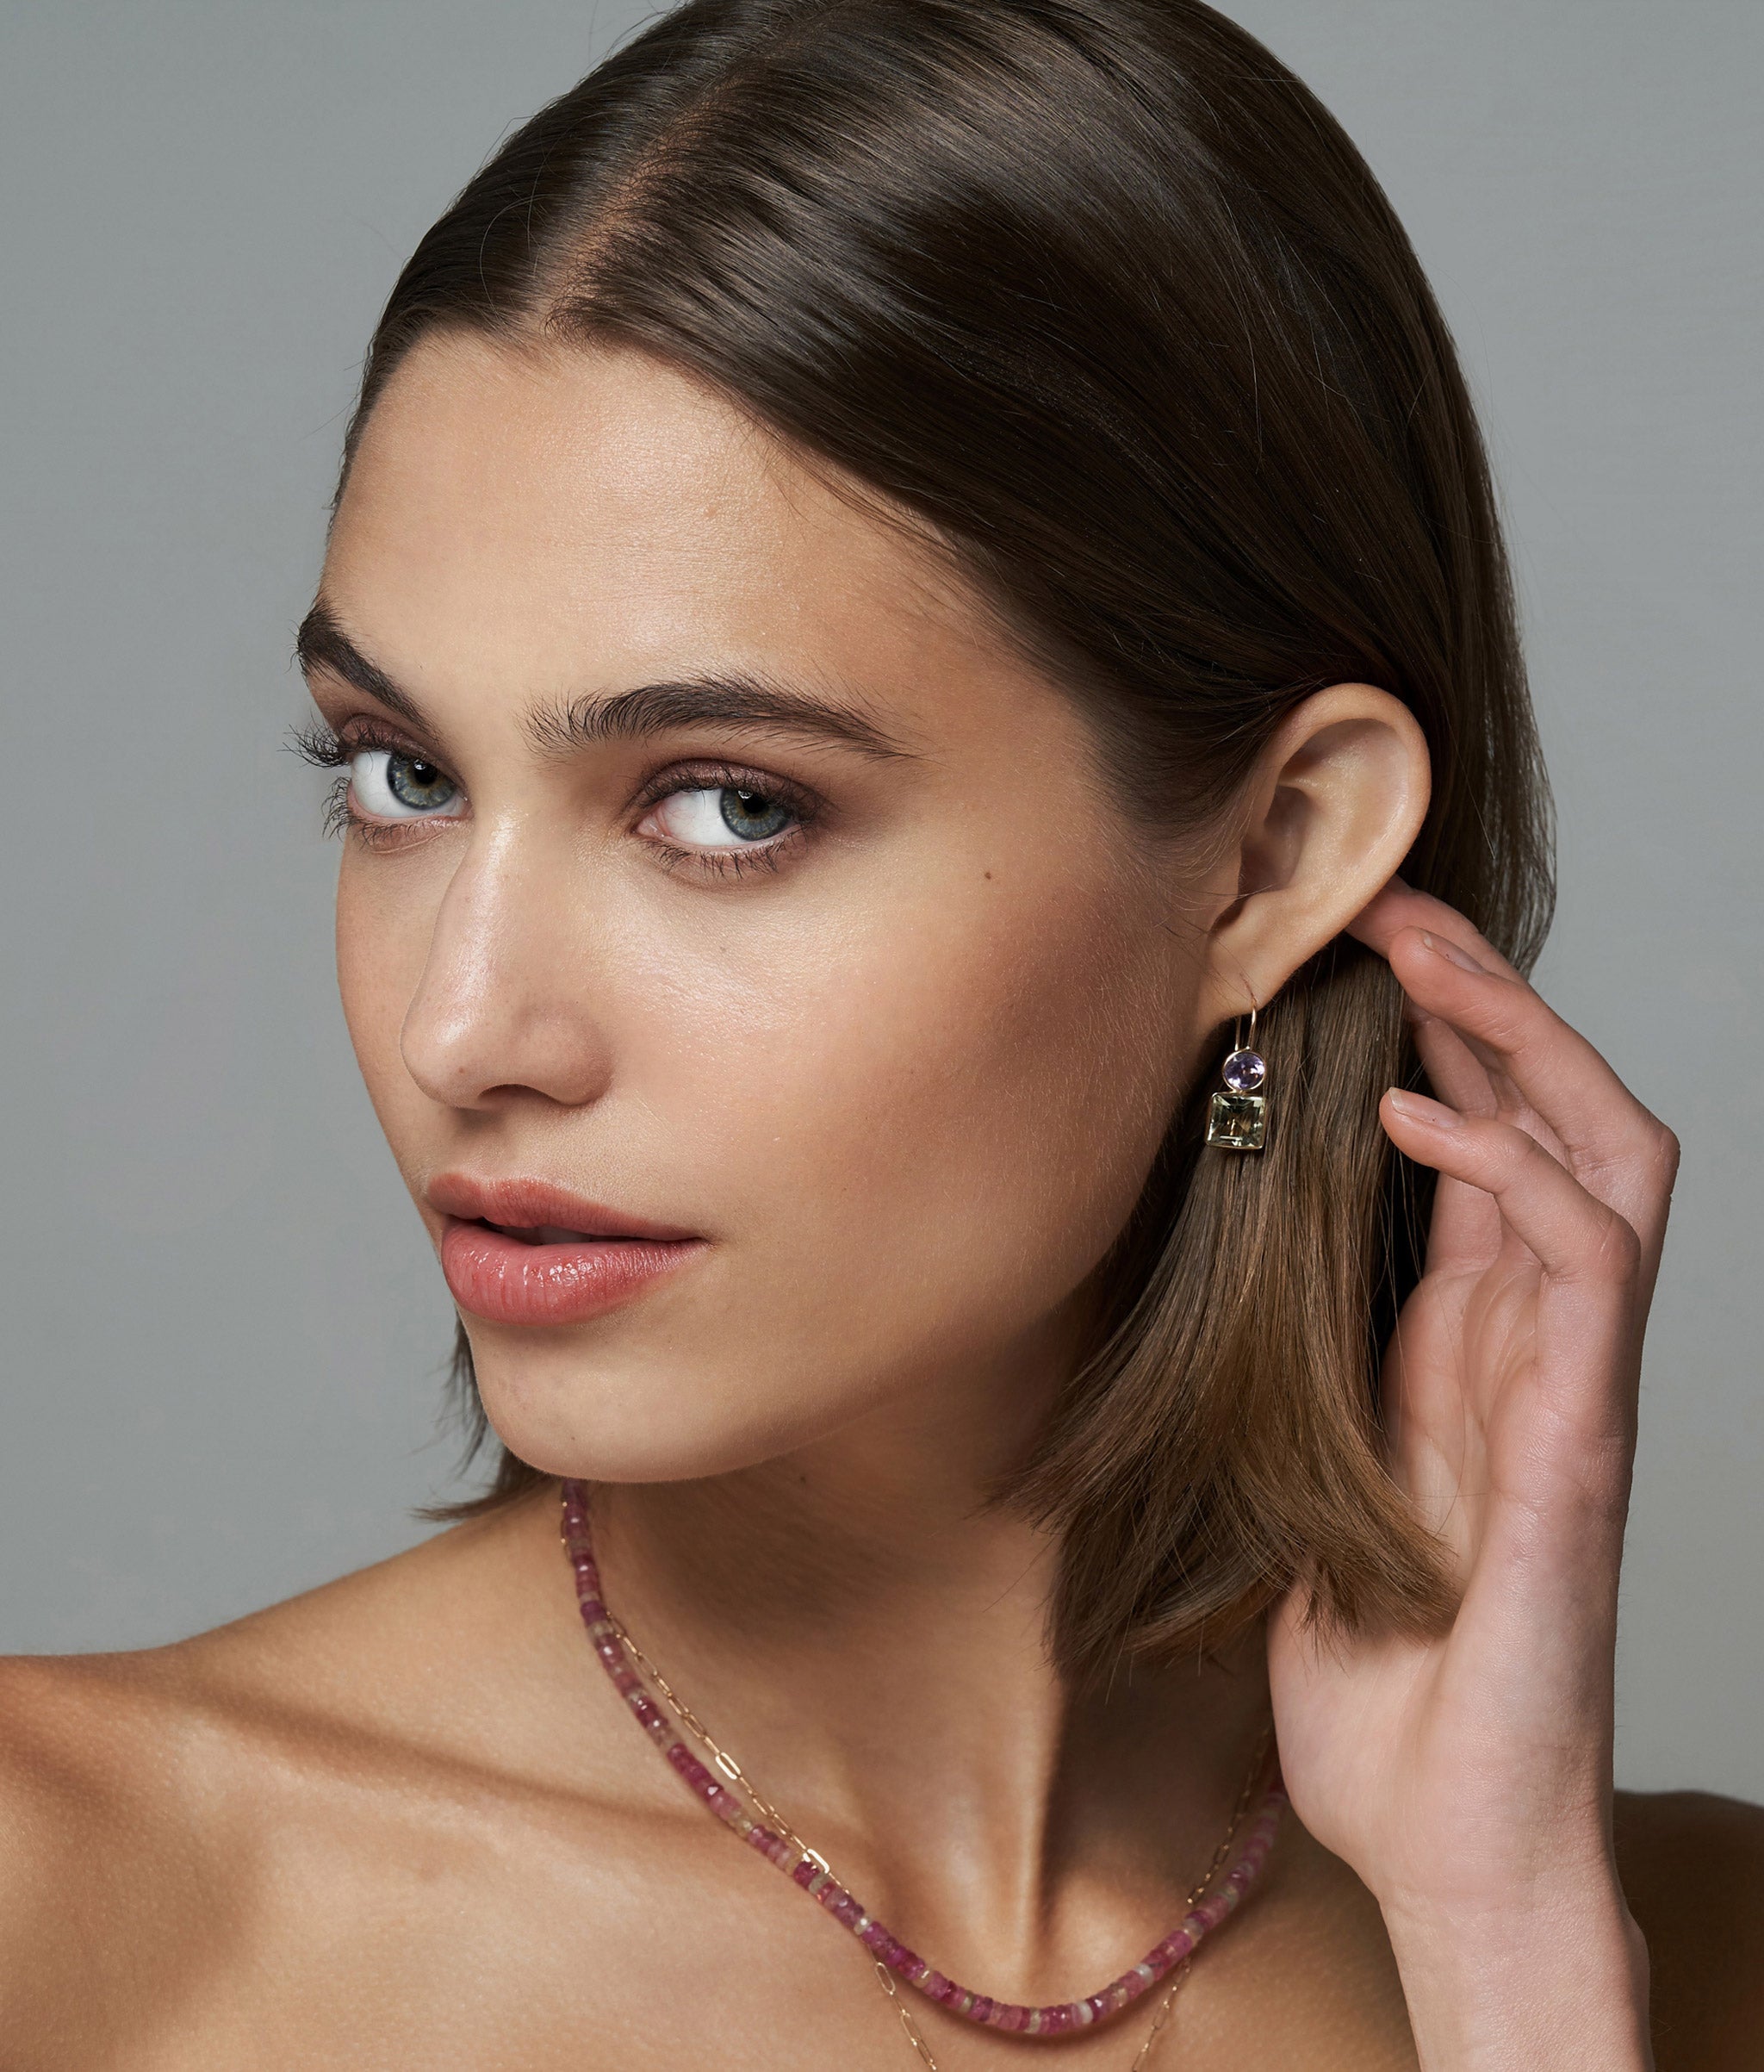 Model on grey backdrop wears 14k Pastille Earrings in Amethyst and Green Amethyst, and Pink Sapphire Necklace.